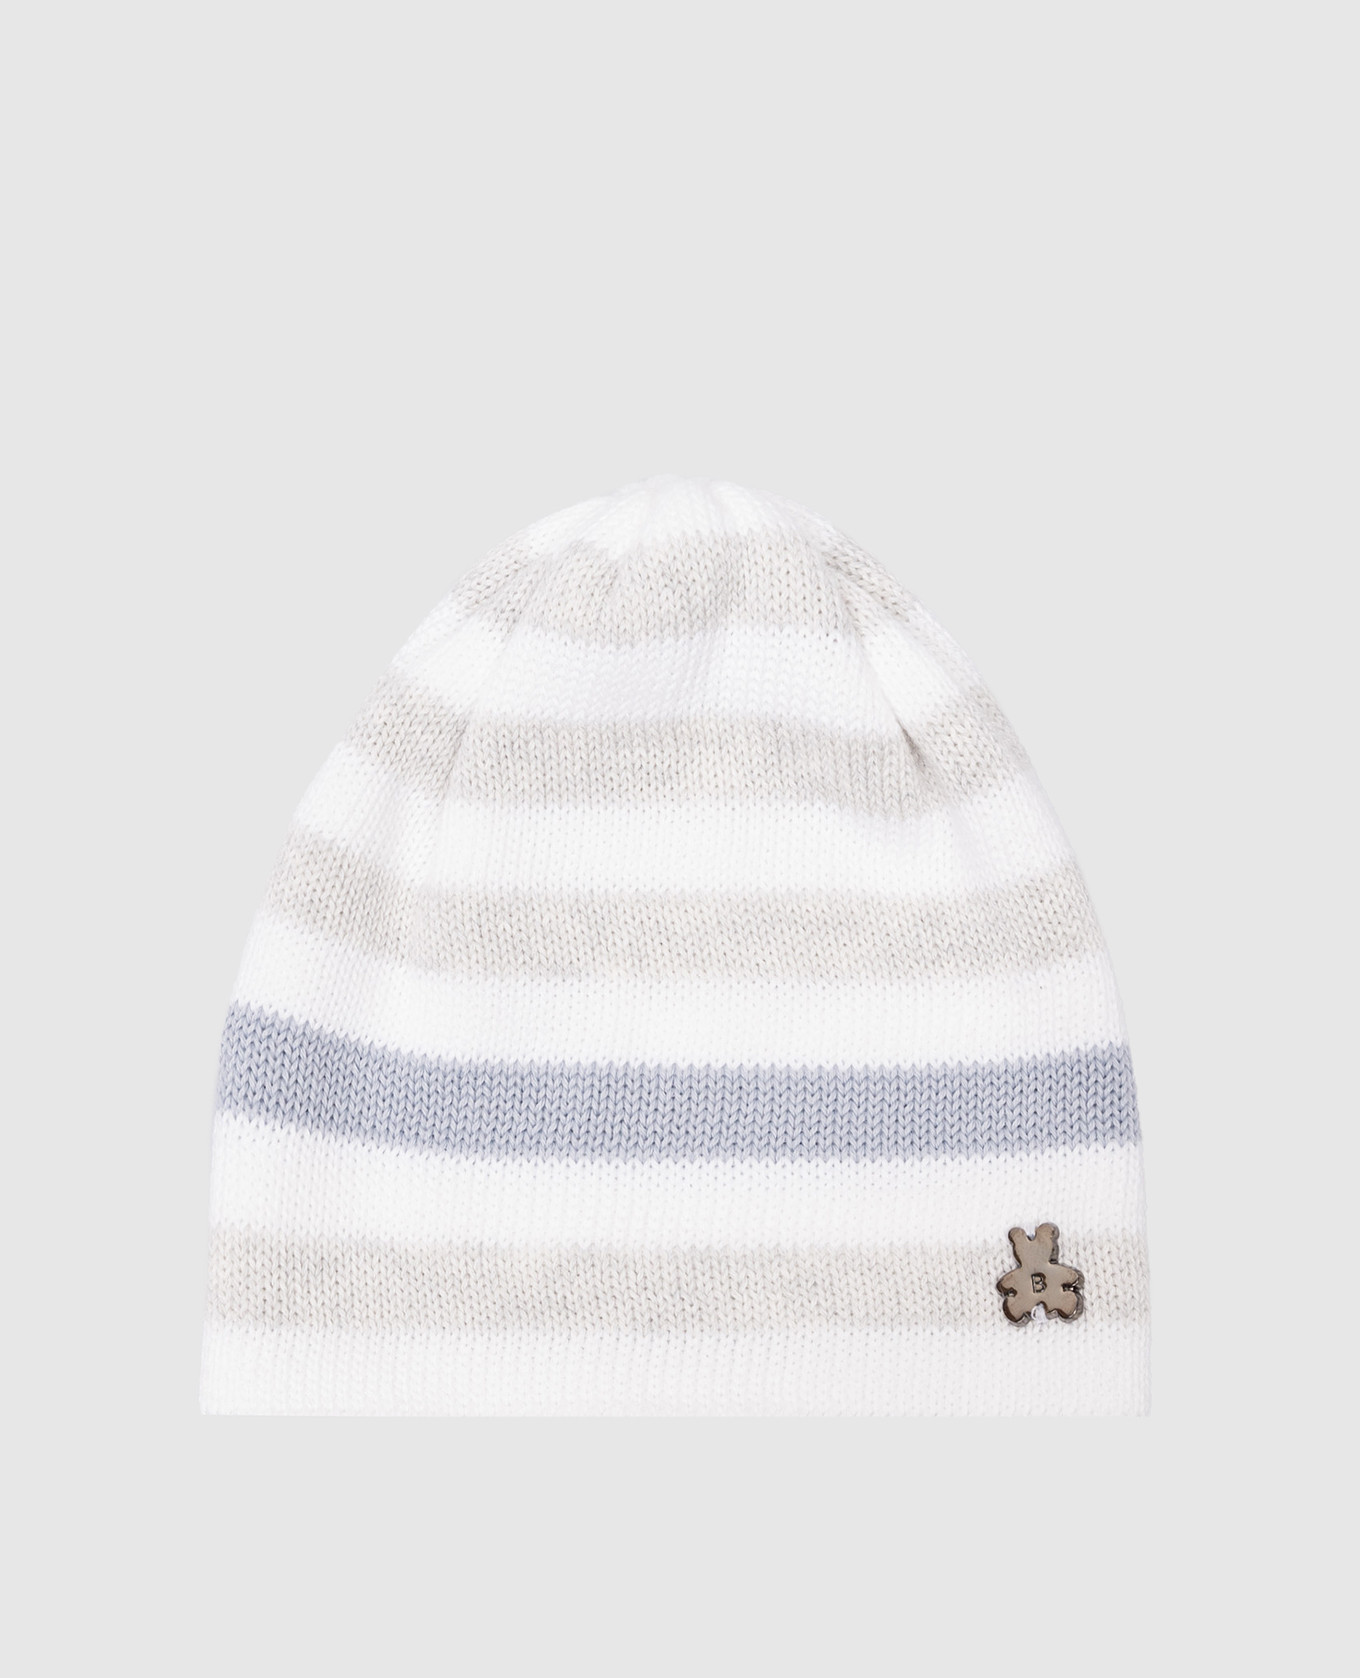 Children's white striped hat with a metal element